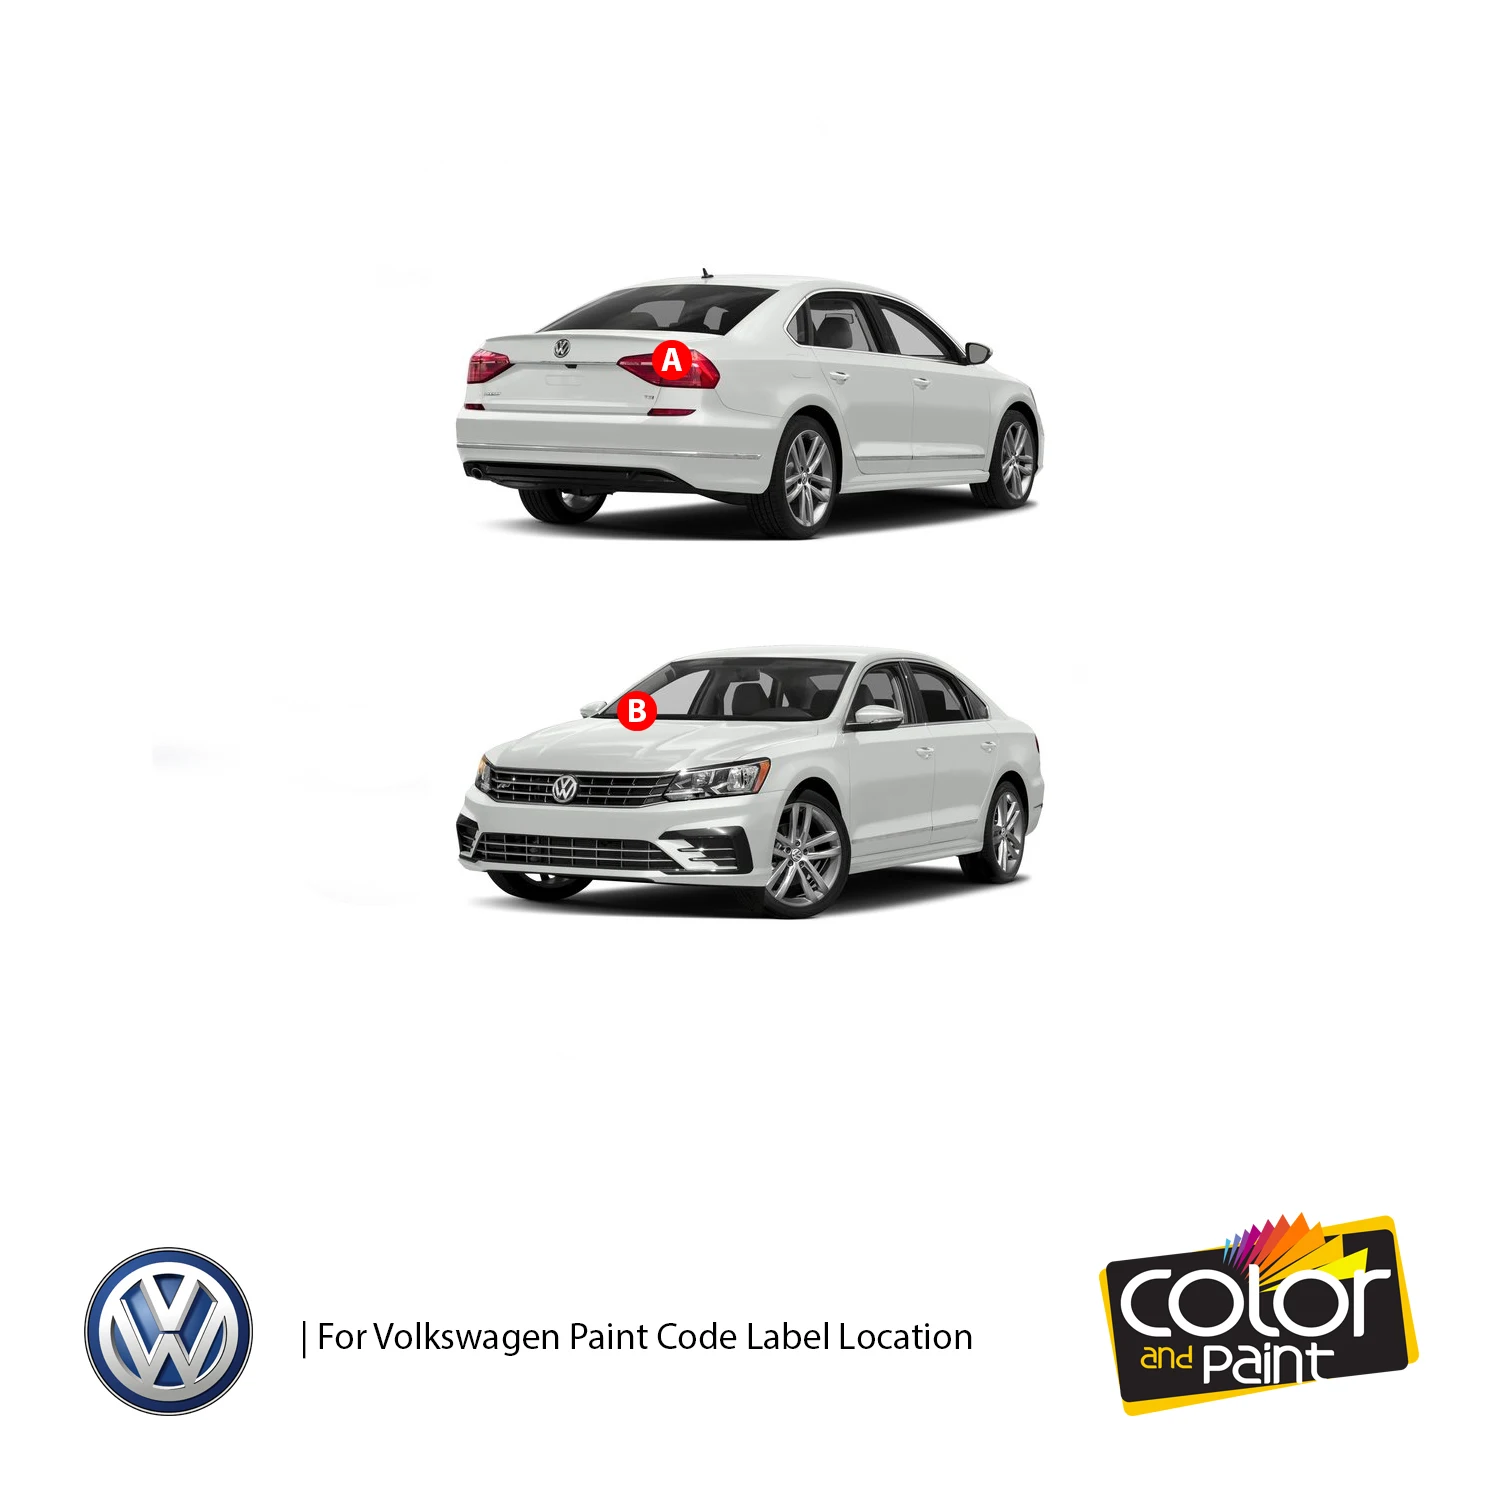 

Color and Paint for Volkswagen Automotive Touch Up Paint - MALAGA RED - L30C - Paint Scratch Repair, exact Match